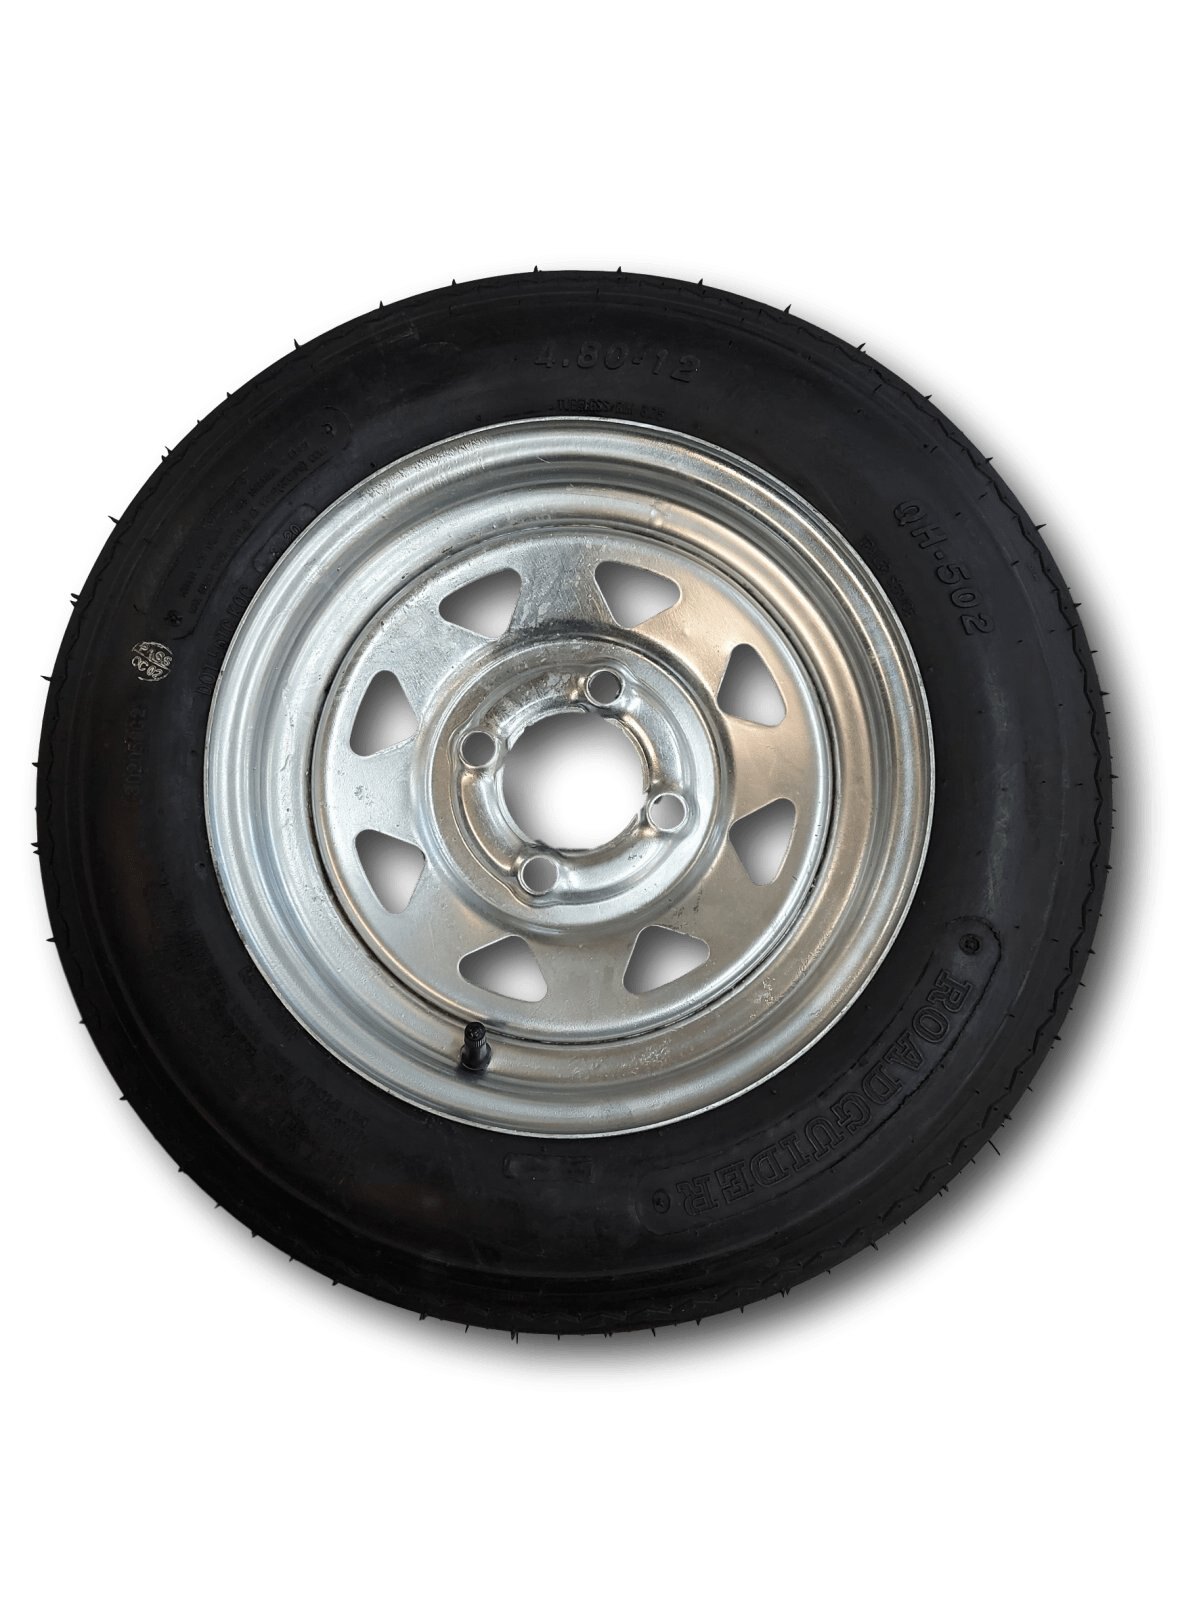 Vallee SPARE TIRE WITH WHEEL FOR LITTLE BLUE